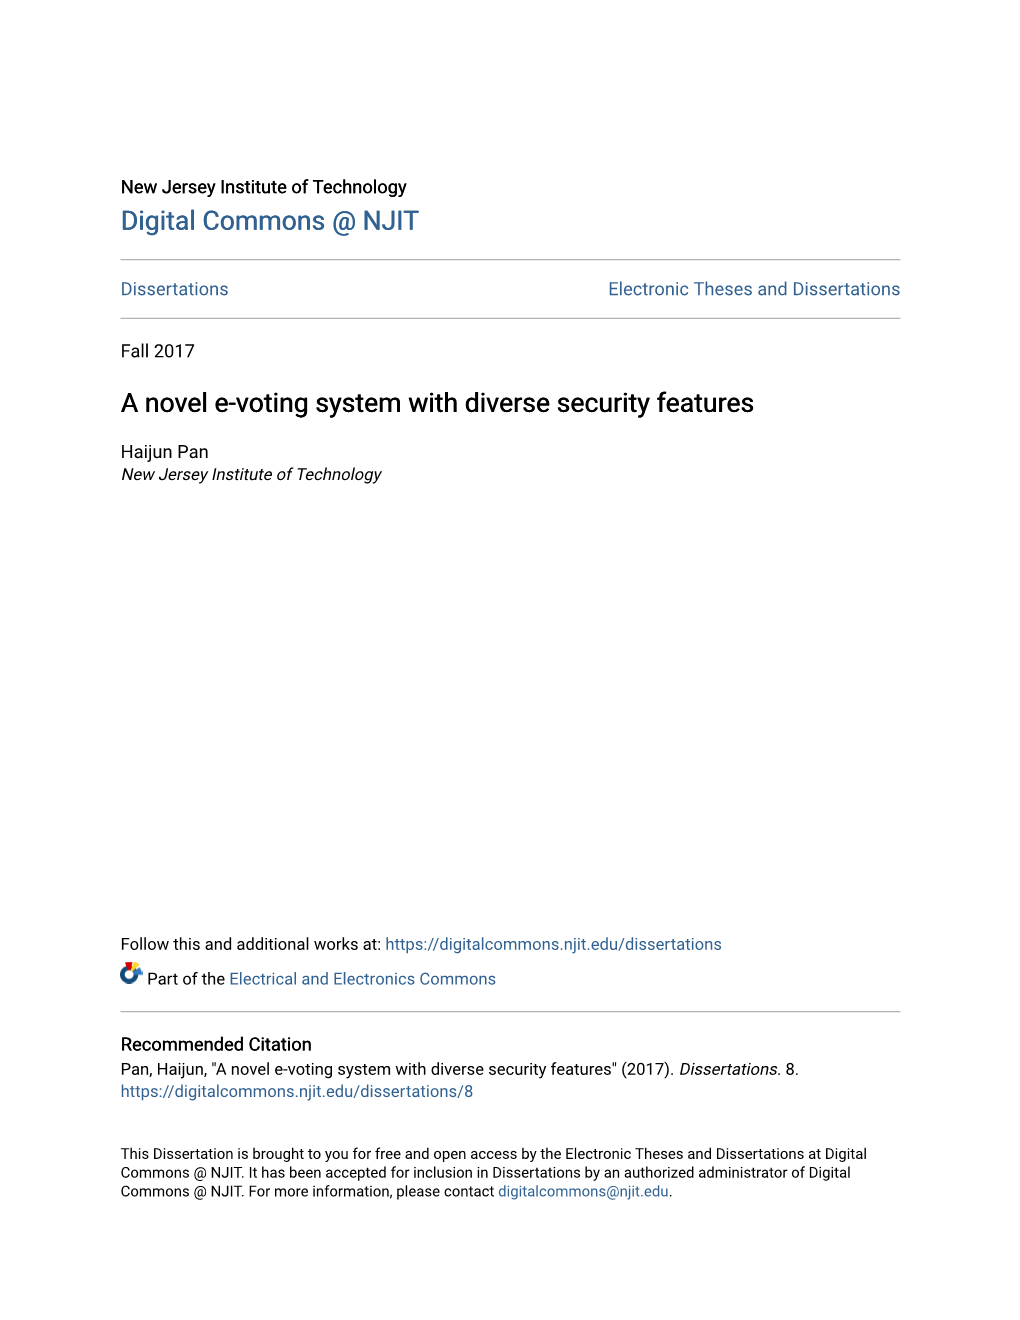 A Novel E-Voting System with Diverse Security Features